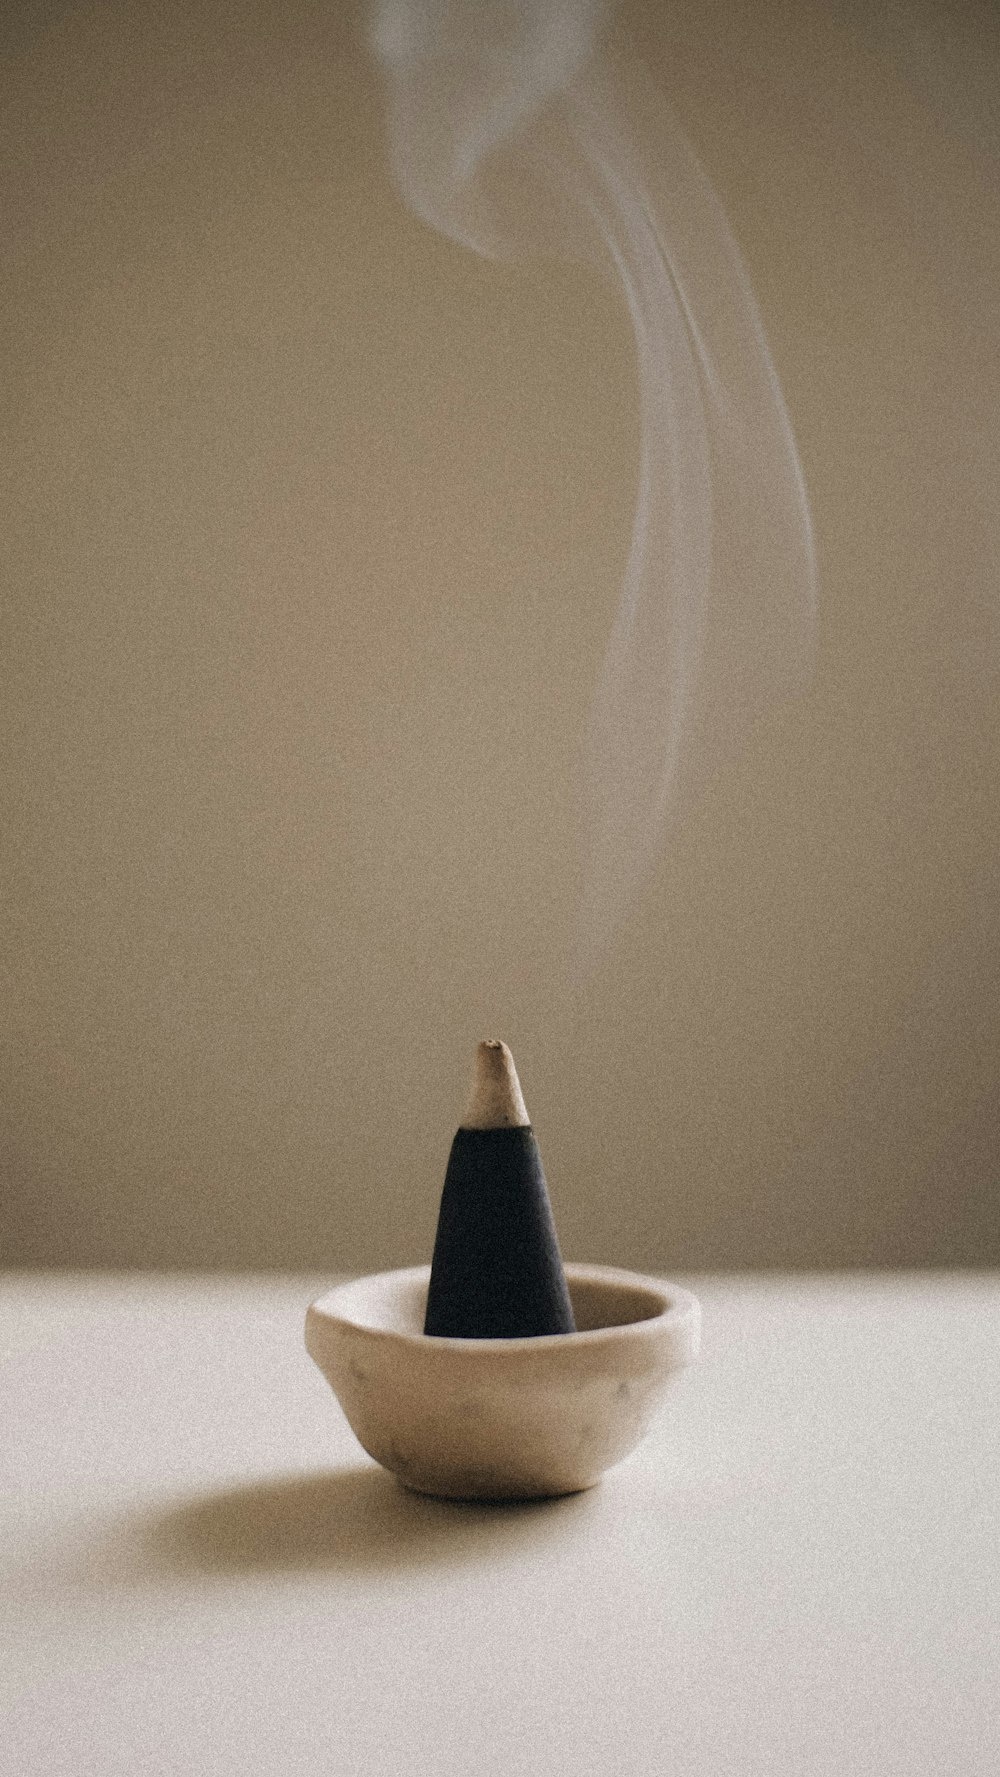 a smokestack sitting in a bowl on a table